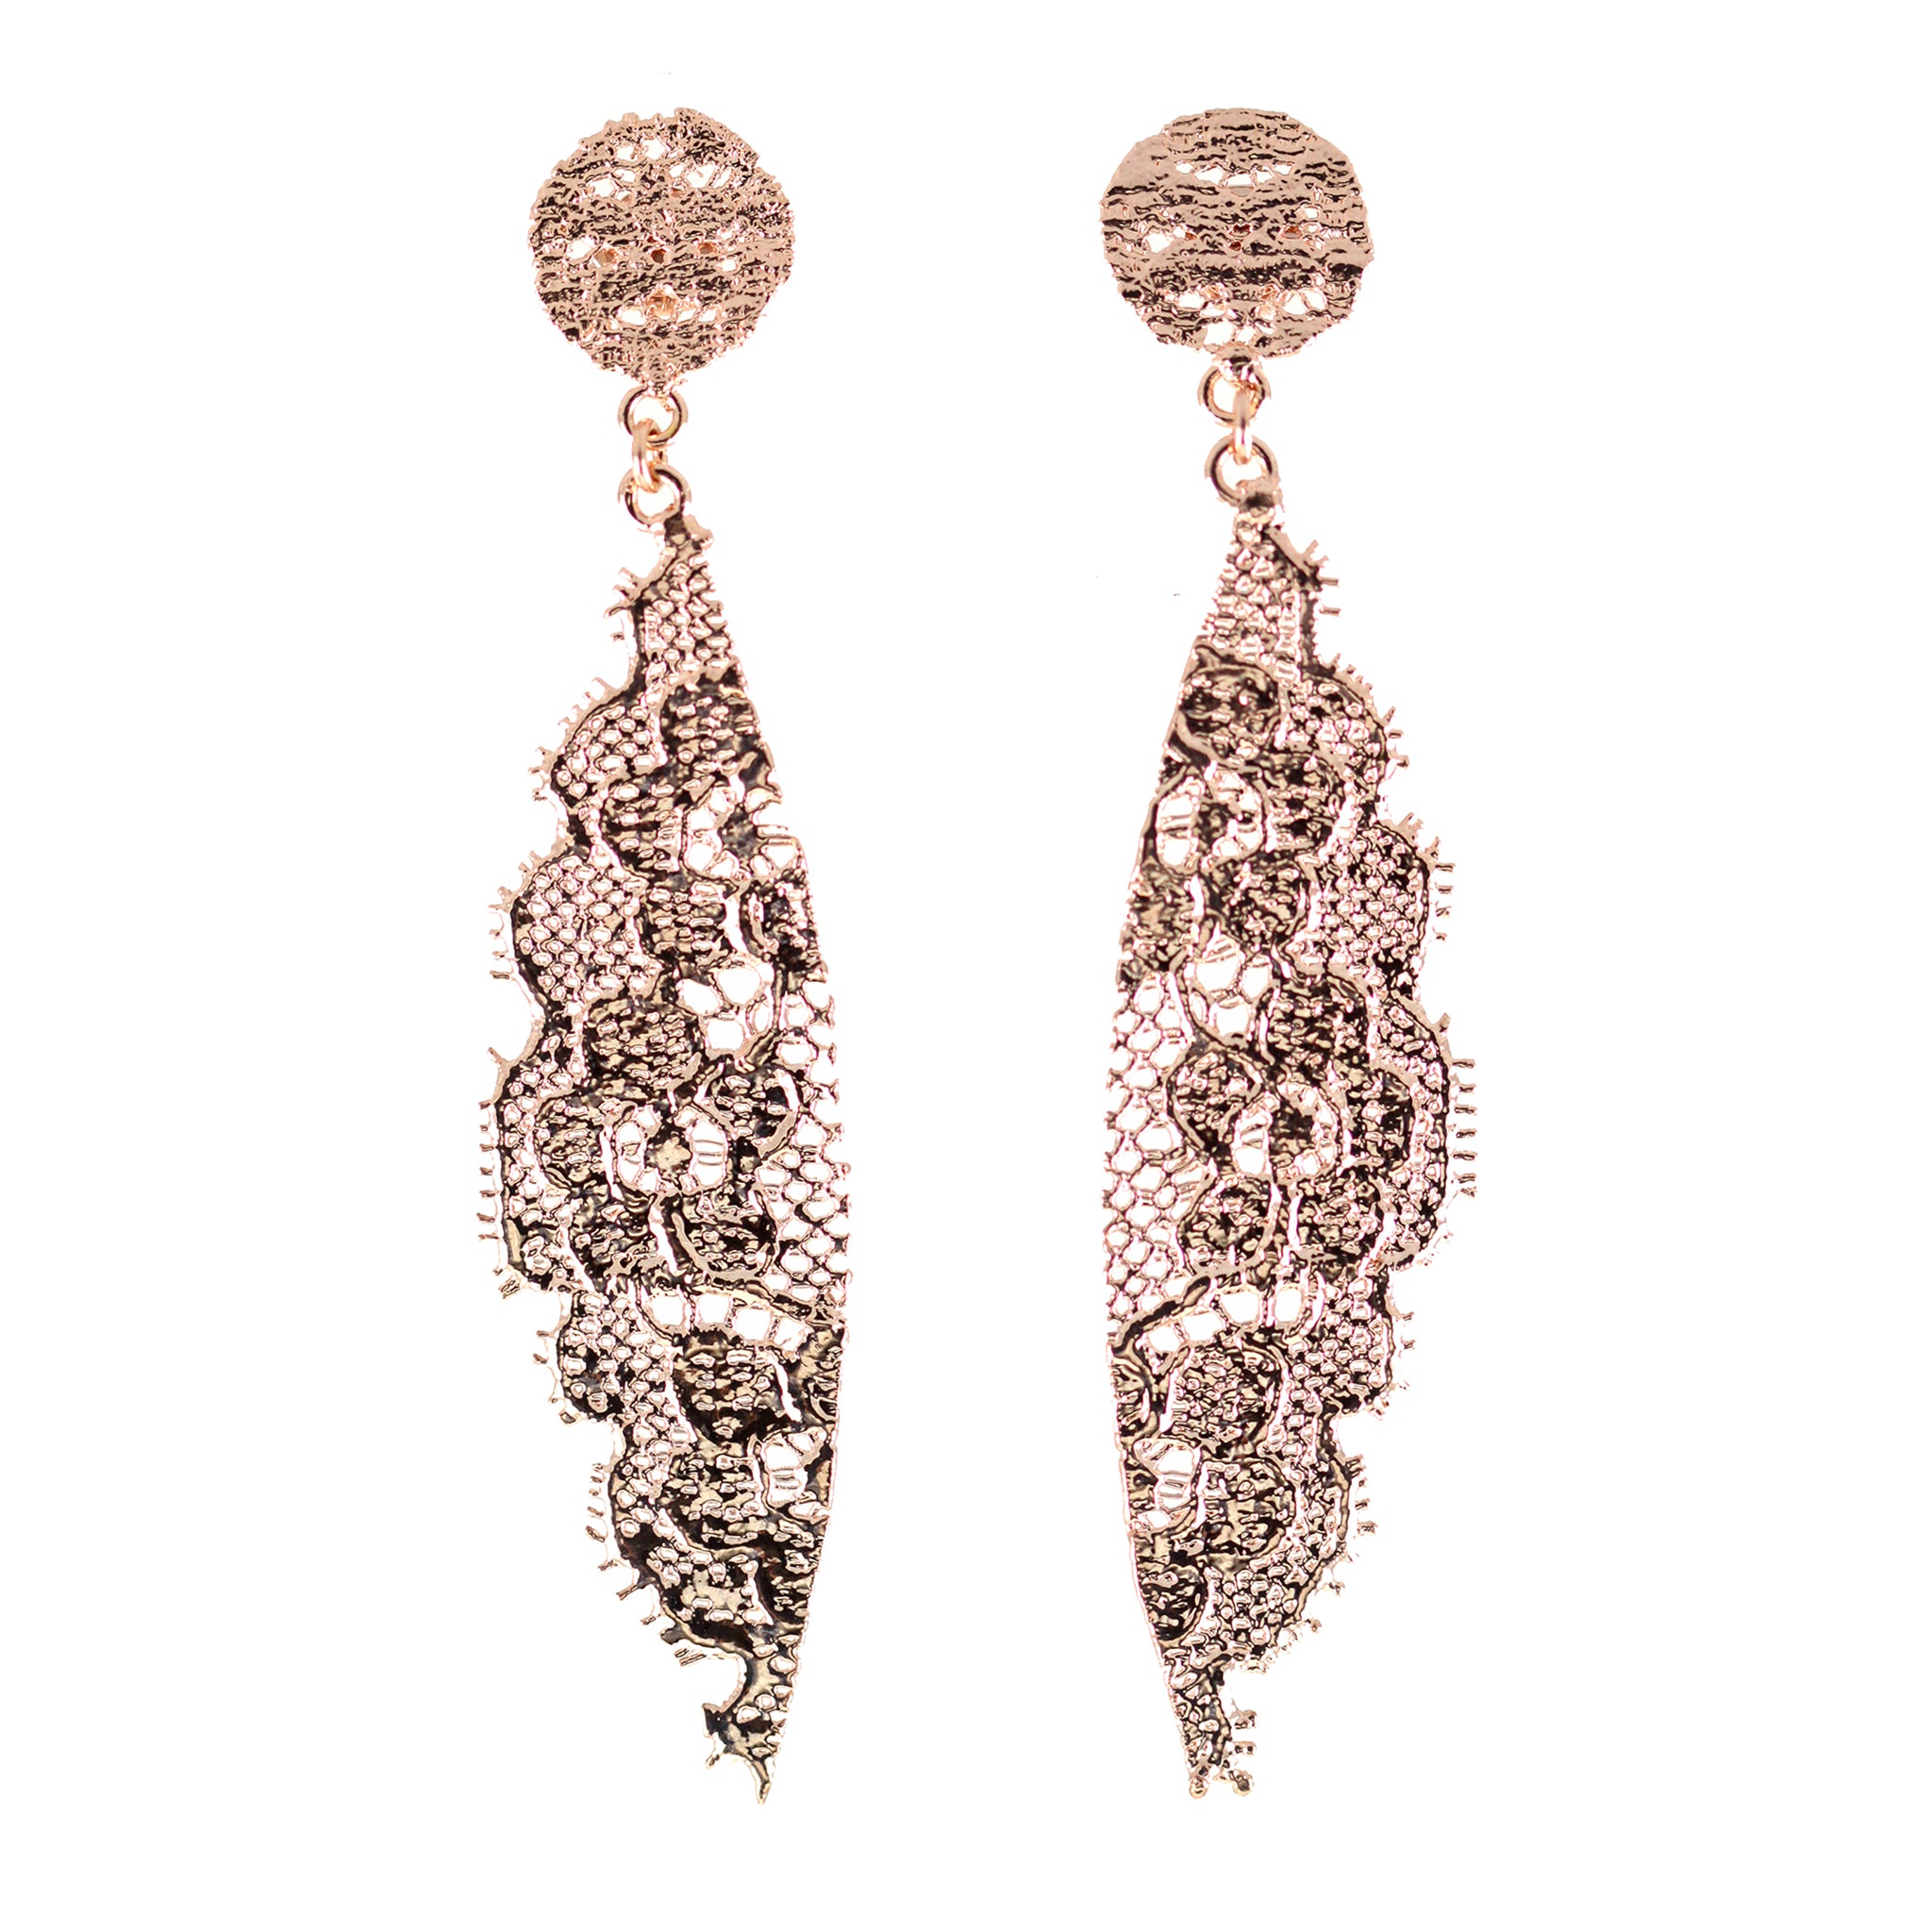 Exceptional Lace Earrings in Rose Gold - 13th Anniversary Gift